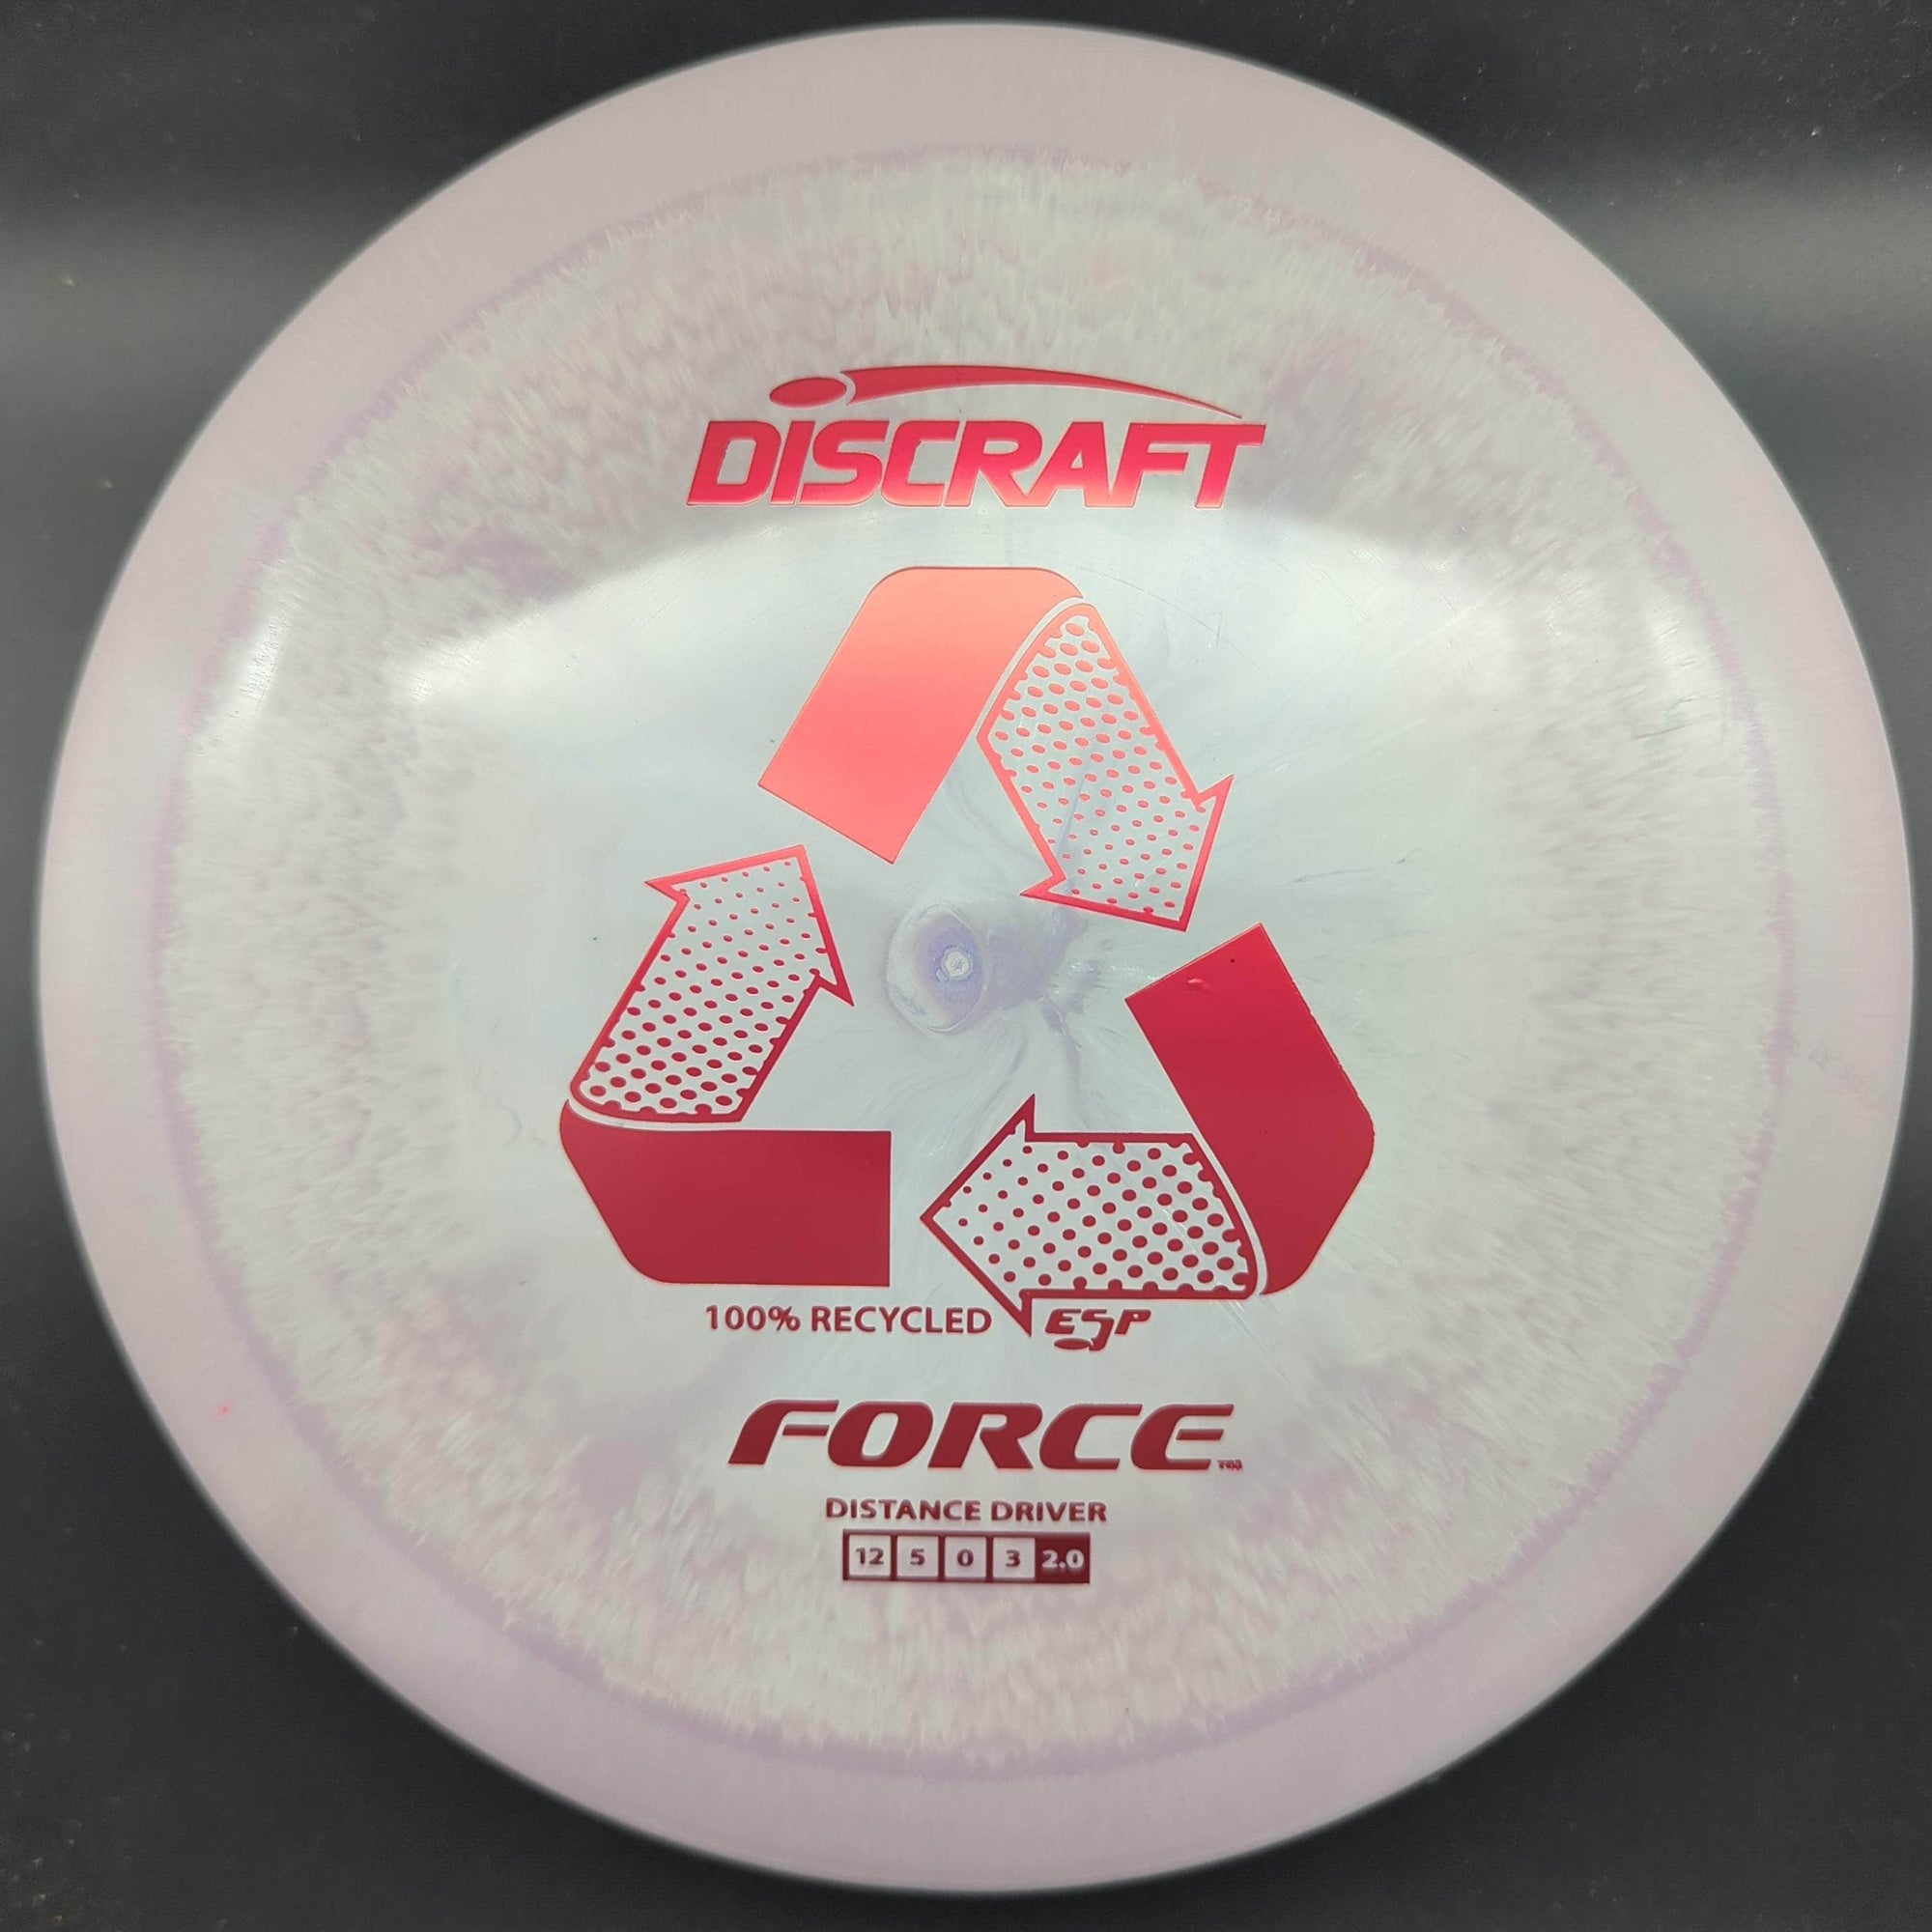 Discraft Distance Driver Grey/Purple Red Stamp 172g Force, 100% Recycled ESP